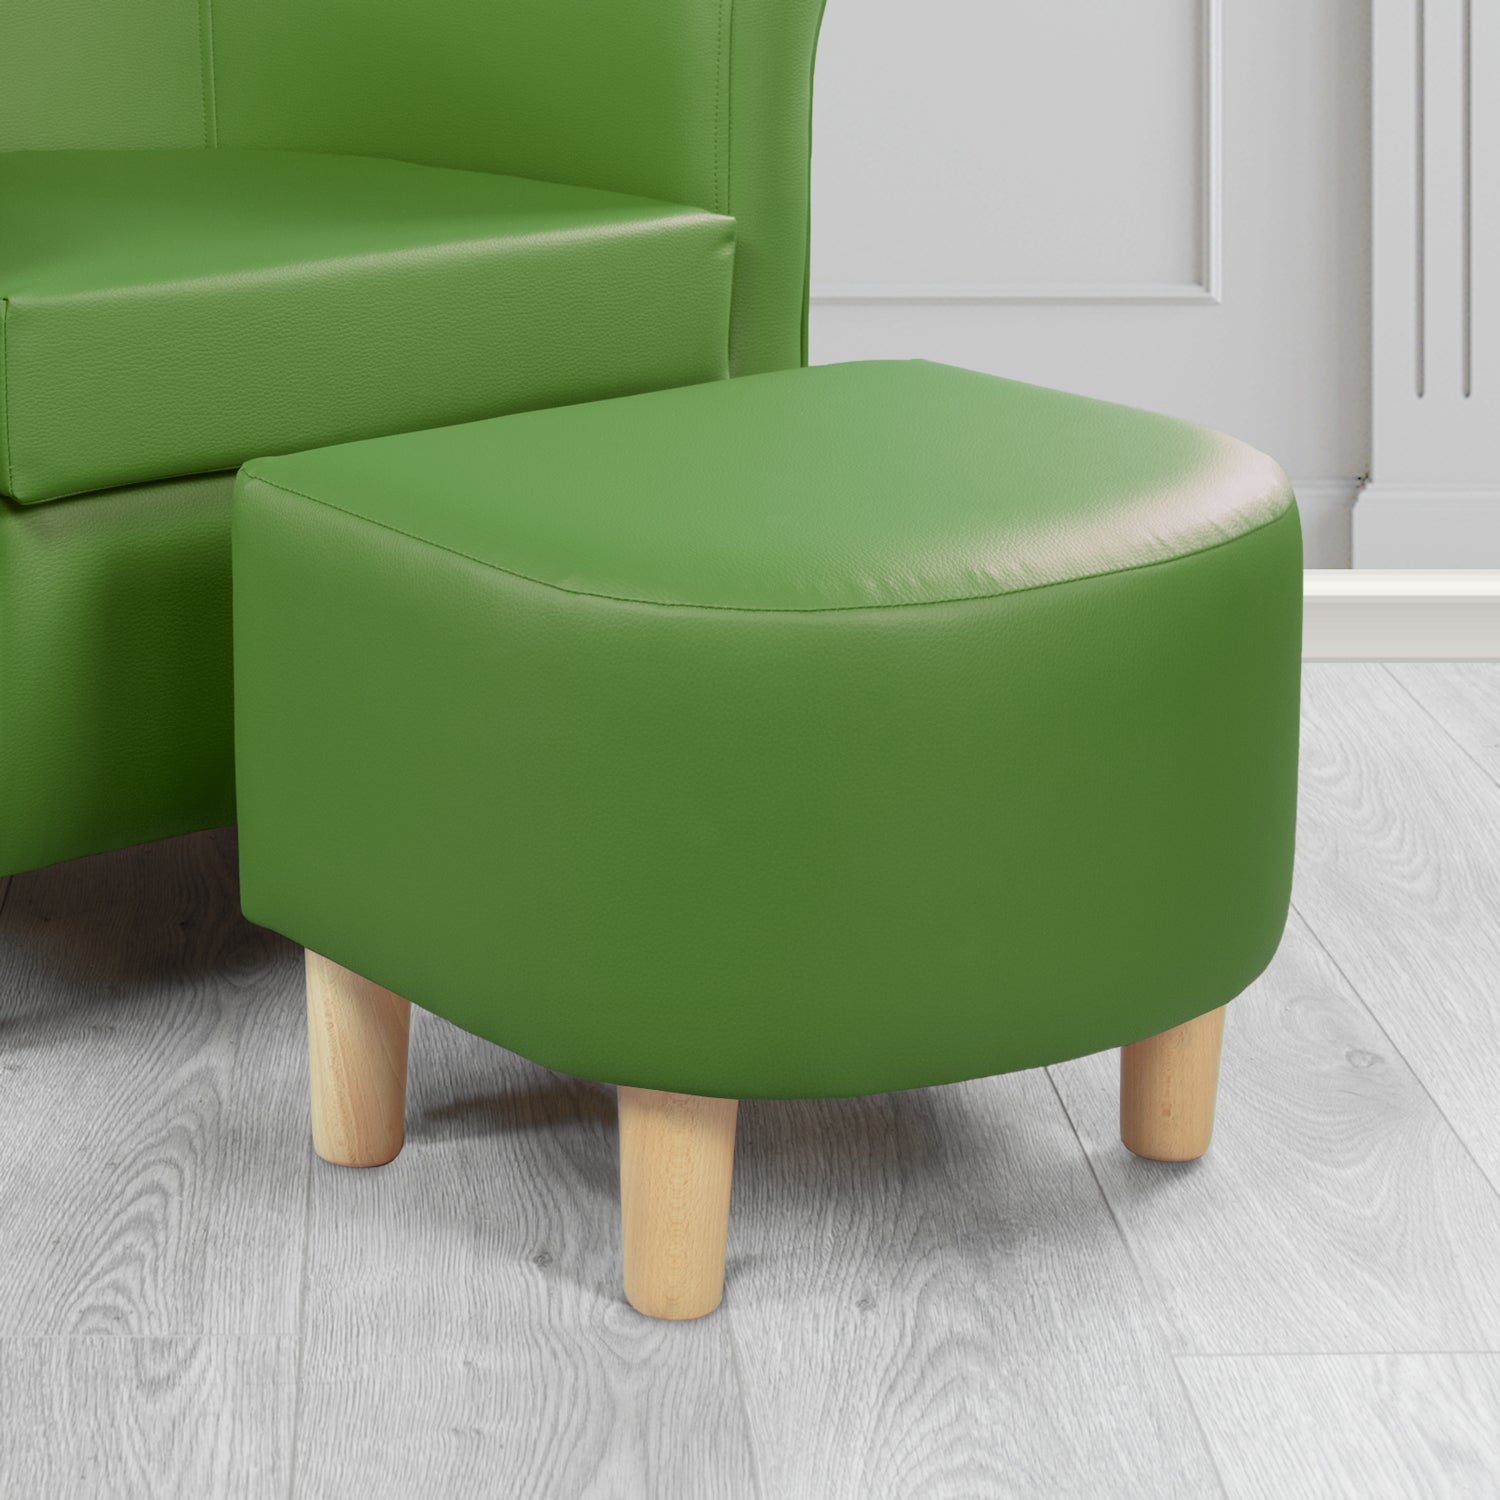 Tuscany Green Faux Leather Footstool (6541234044970)